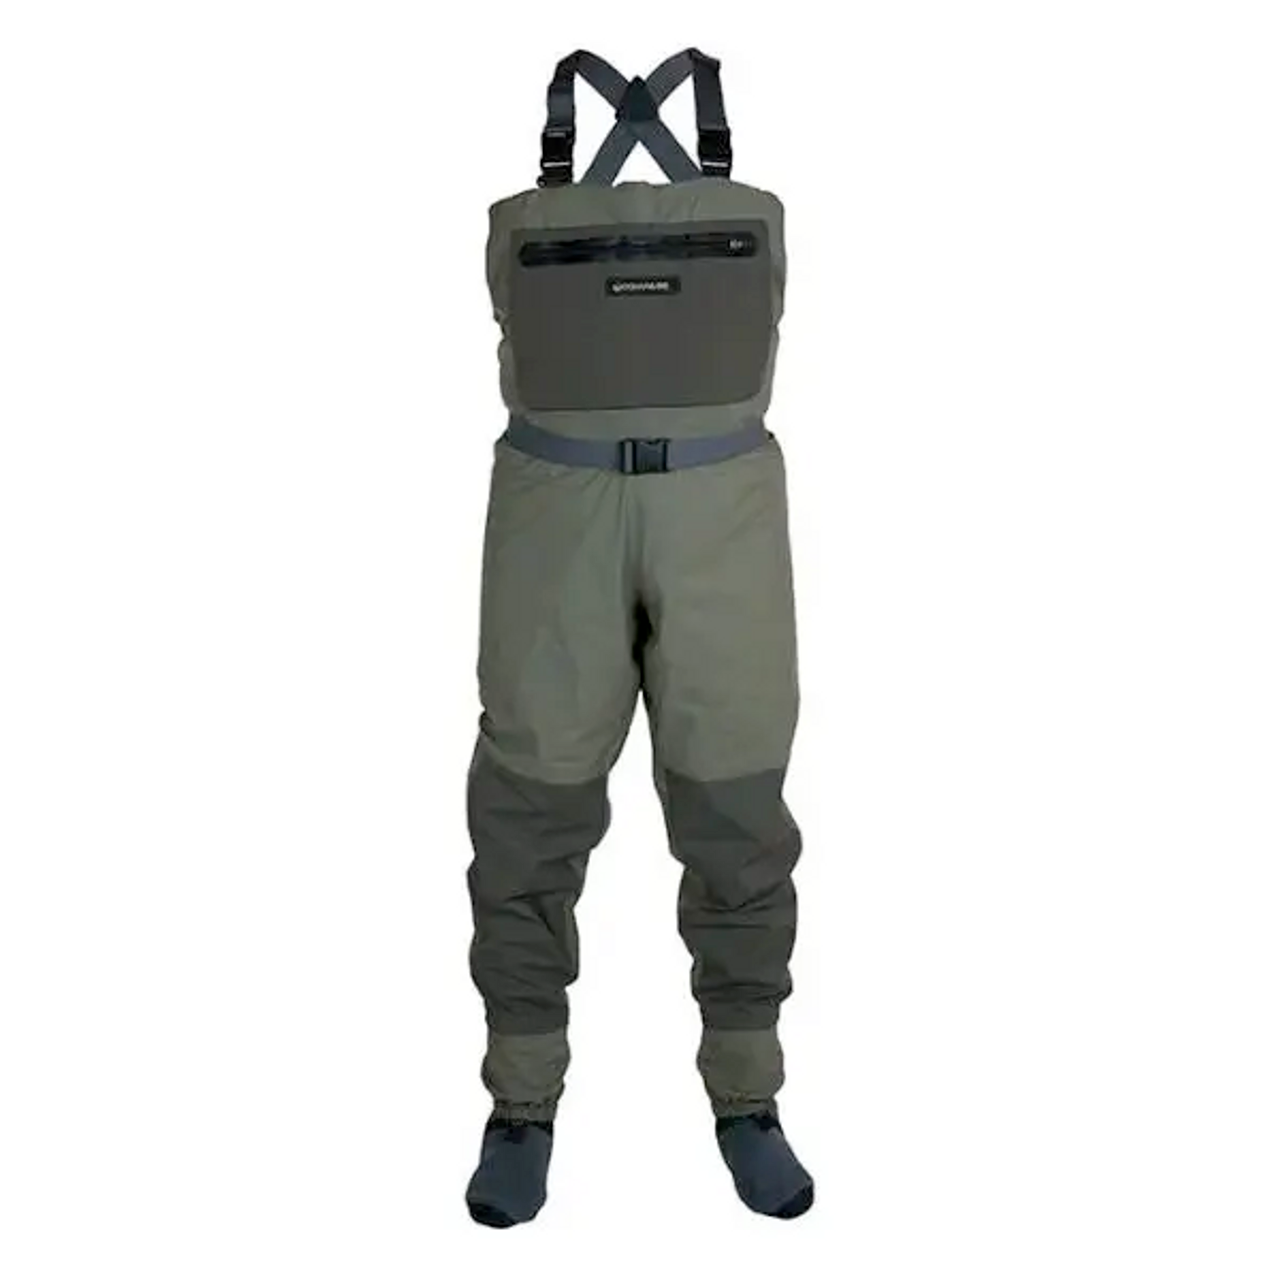 Compass 360 DEADFALL Stocking Foot Wader, Coffee/ Stone, Size: Small